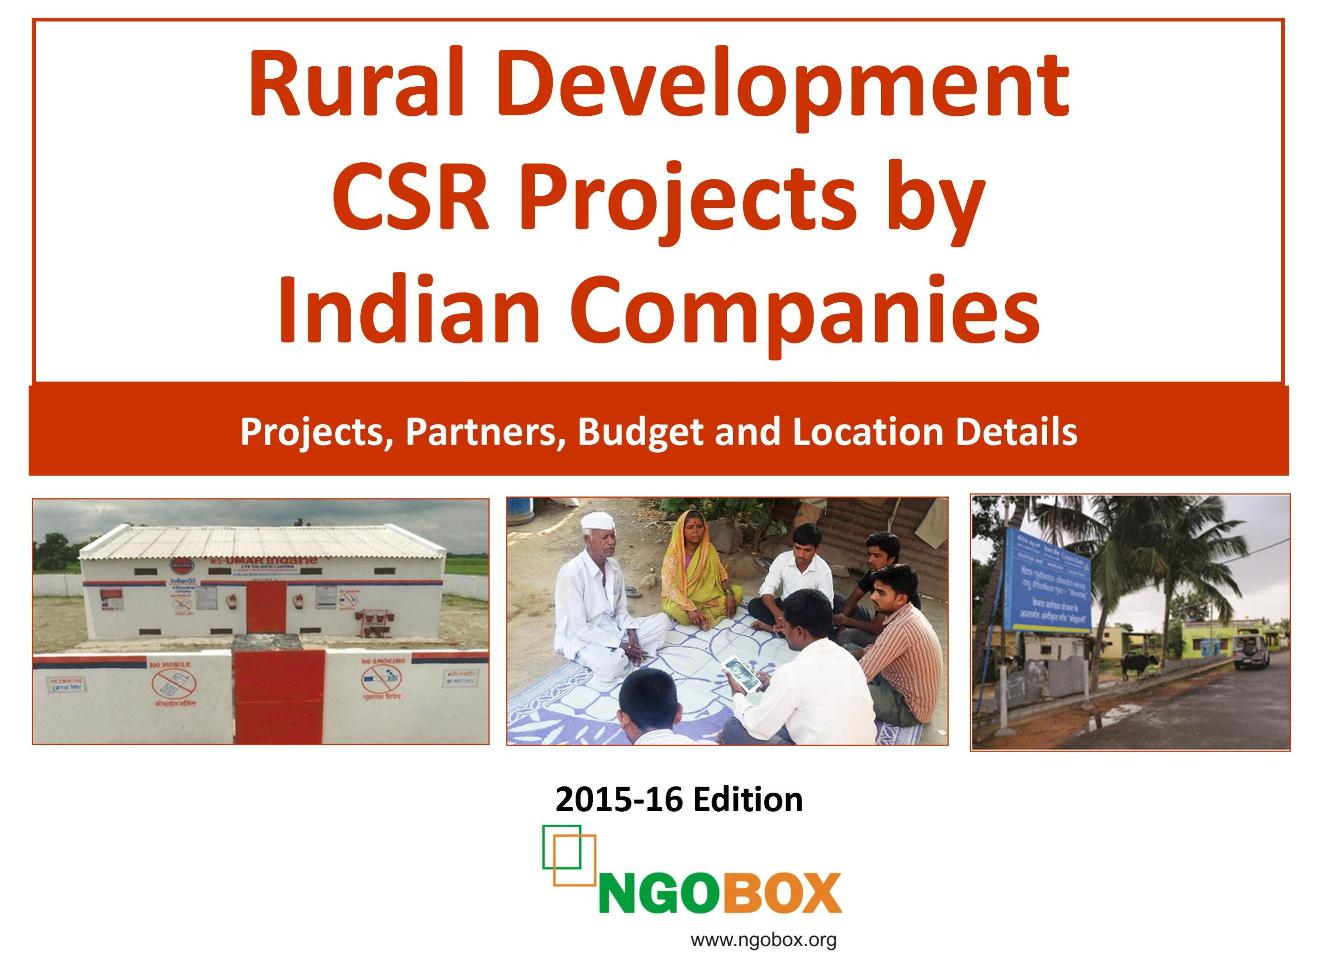 Rural Development CSR Projects by Indian Companies